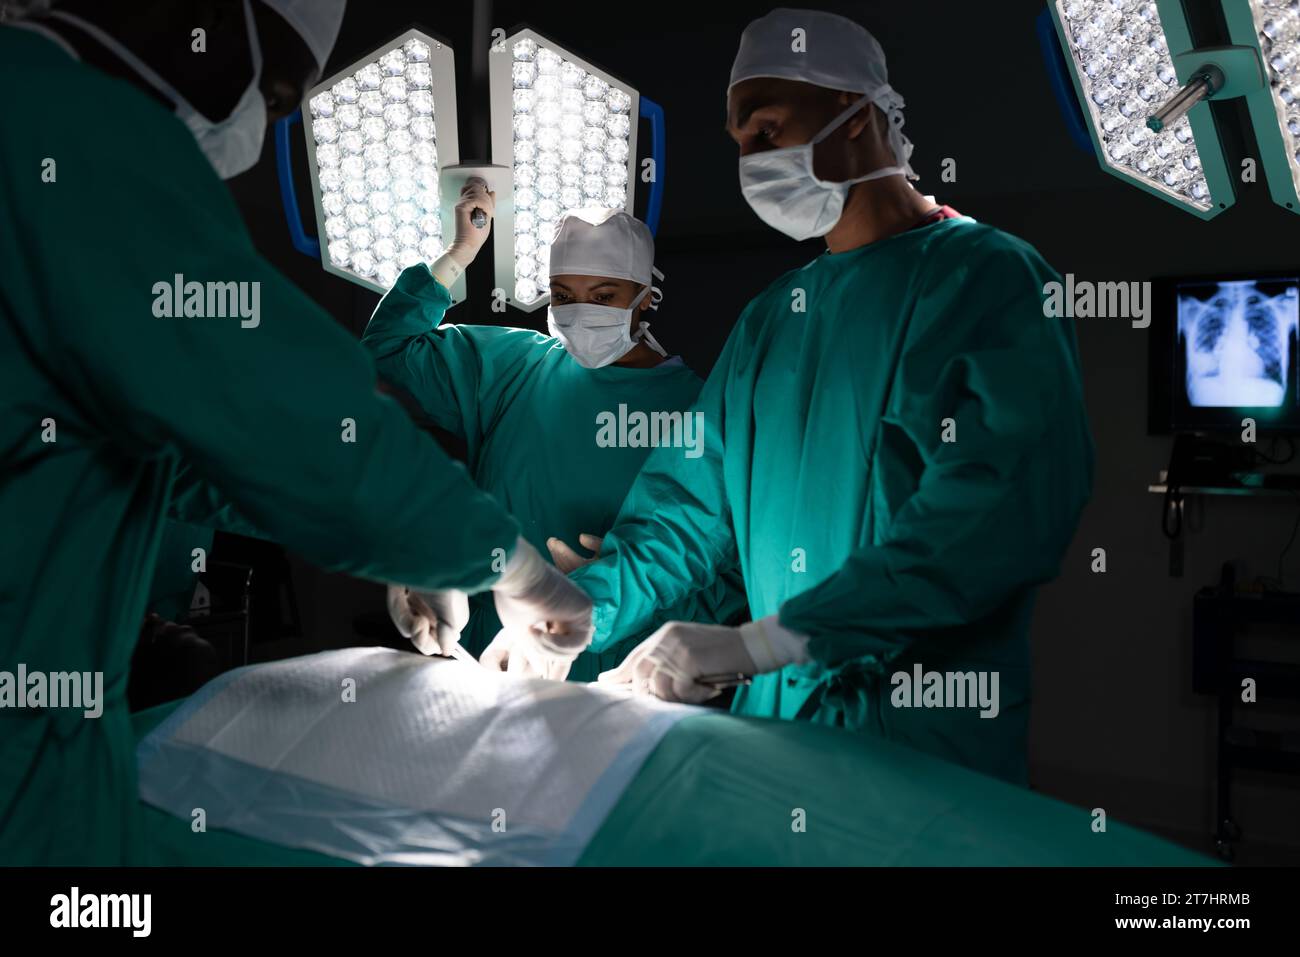 Diverse surgeons wearing surgical gowns operating on patient in operating theatre at hospital Stock Photo